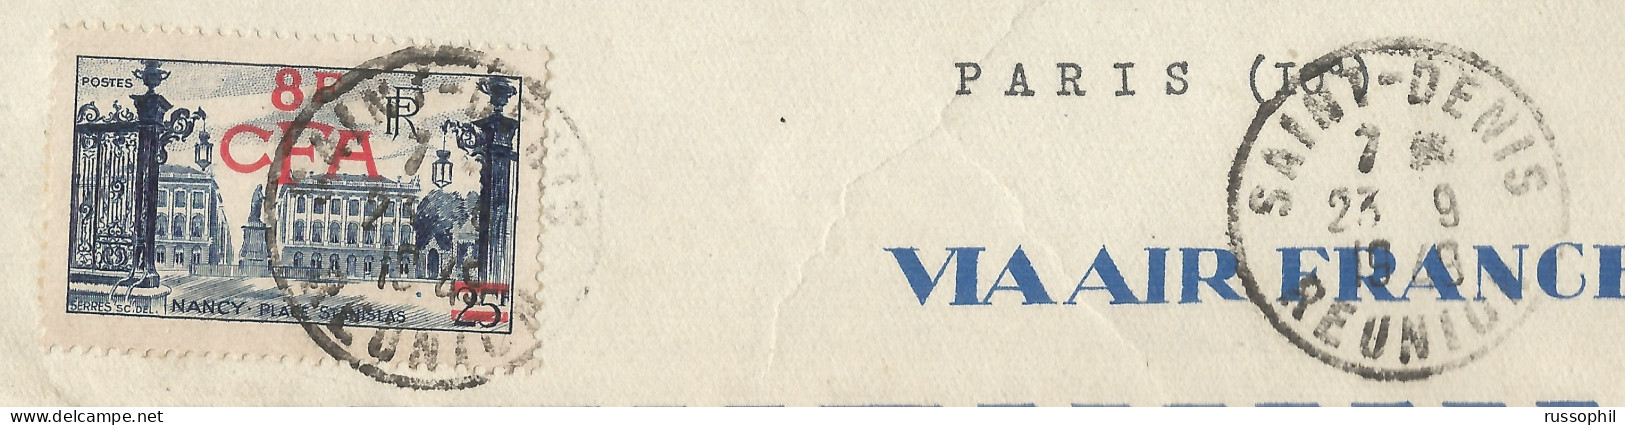 REUNION - OVERCHARGED 8 F CFA STAMP FRANKING COMMERCIAL AIR COVER FROM SAINT DENIS TO MAINLAND FRANCE - 1949 - Lettres & Documents